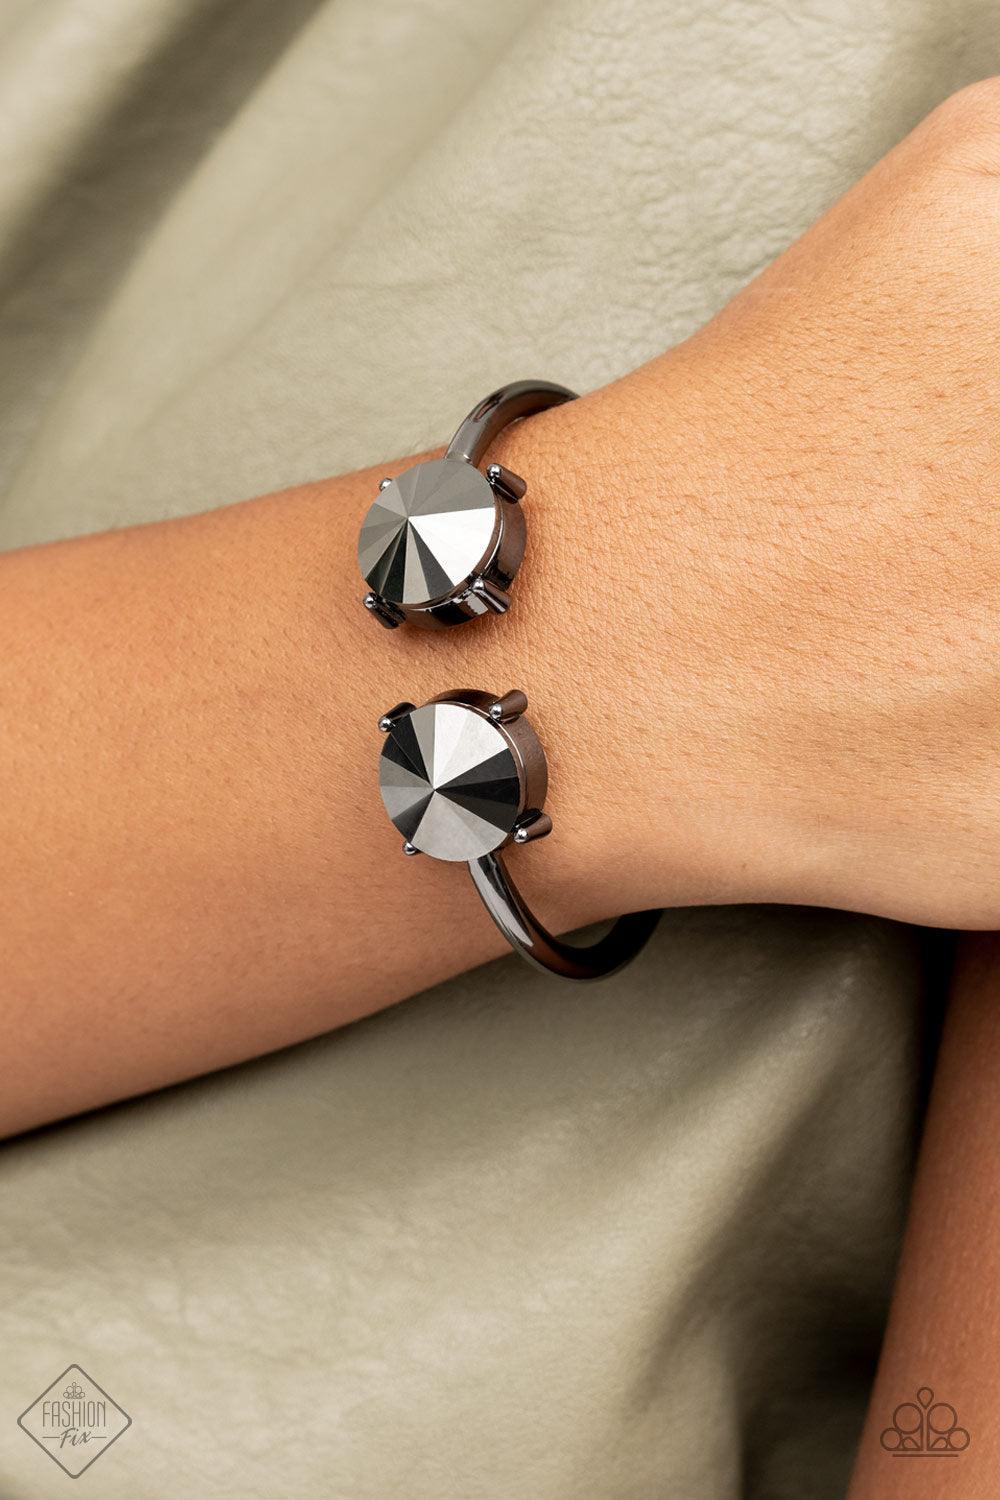 Paparazzi Accessories Spark and Sizzle - Black Two dramatically oversized hematite rhinestones are nestled inside pronged gunmetal fittings at the ends of a hinged gunmetal cuff, creating a smoldering statement piece that wraps boldly around the wrist. Fe